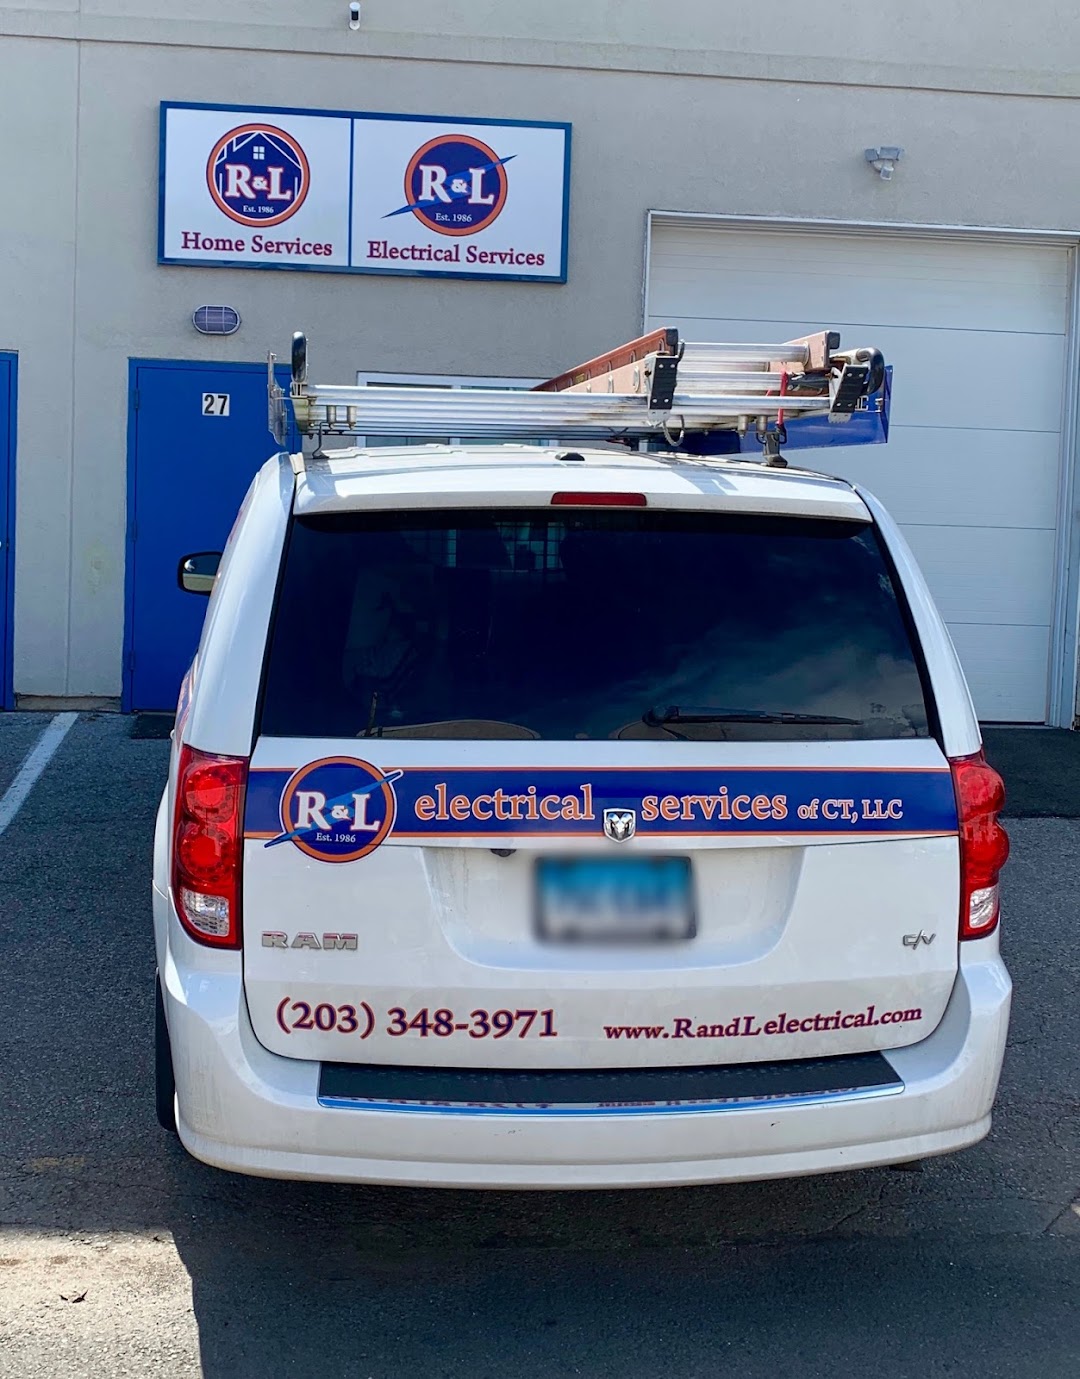 R & L Electrical Services of Ct, LLC